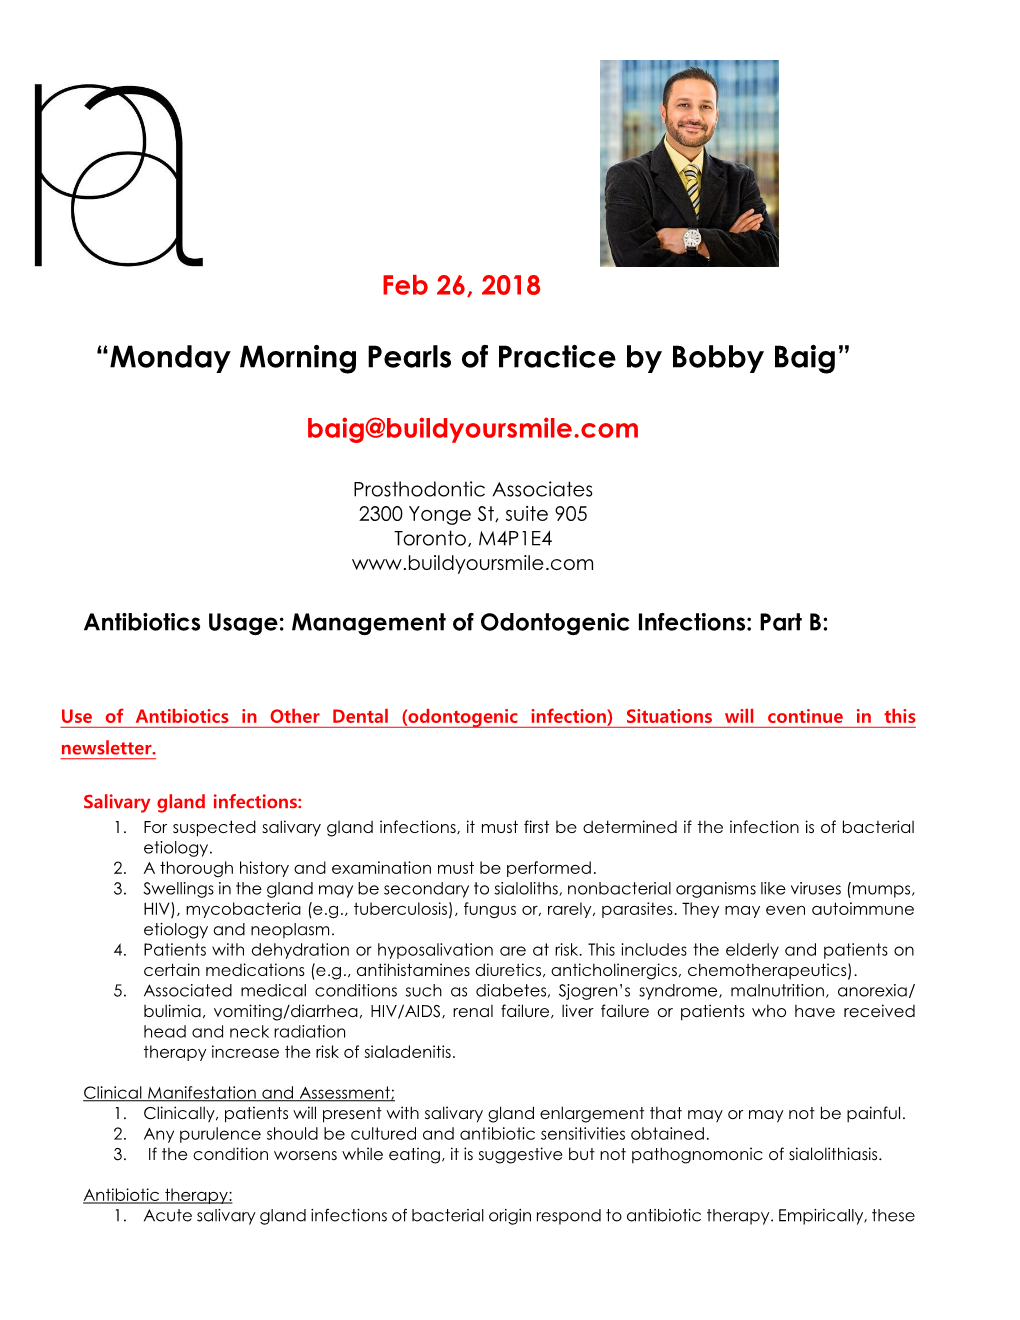 “Monday Morning Pearls of Practice by Bobby Baig”